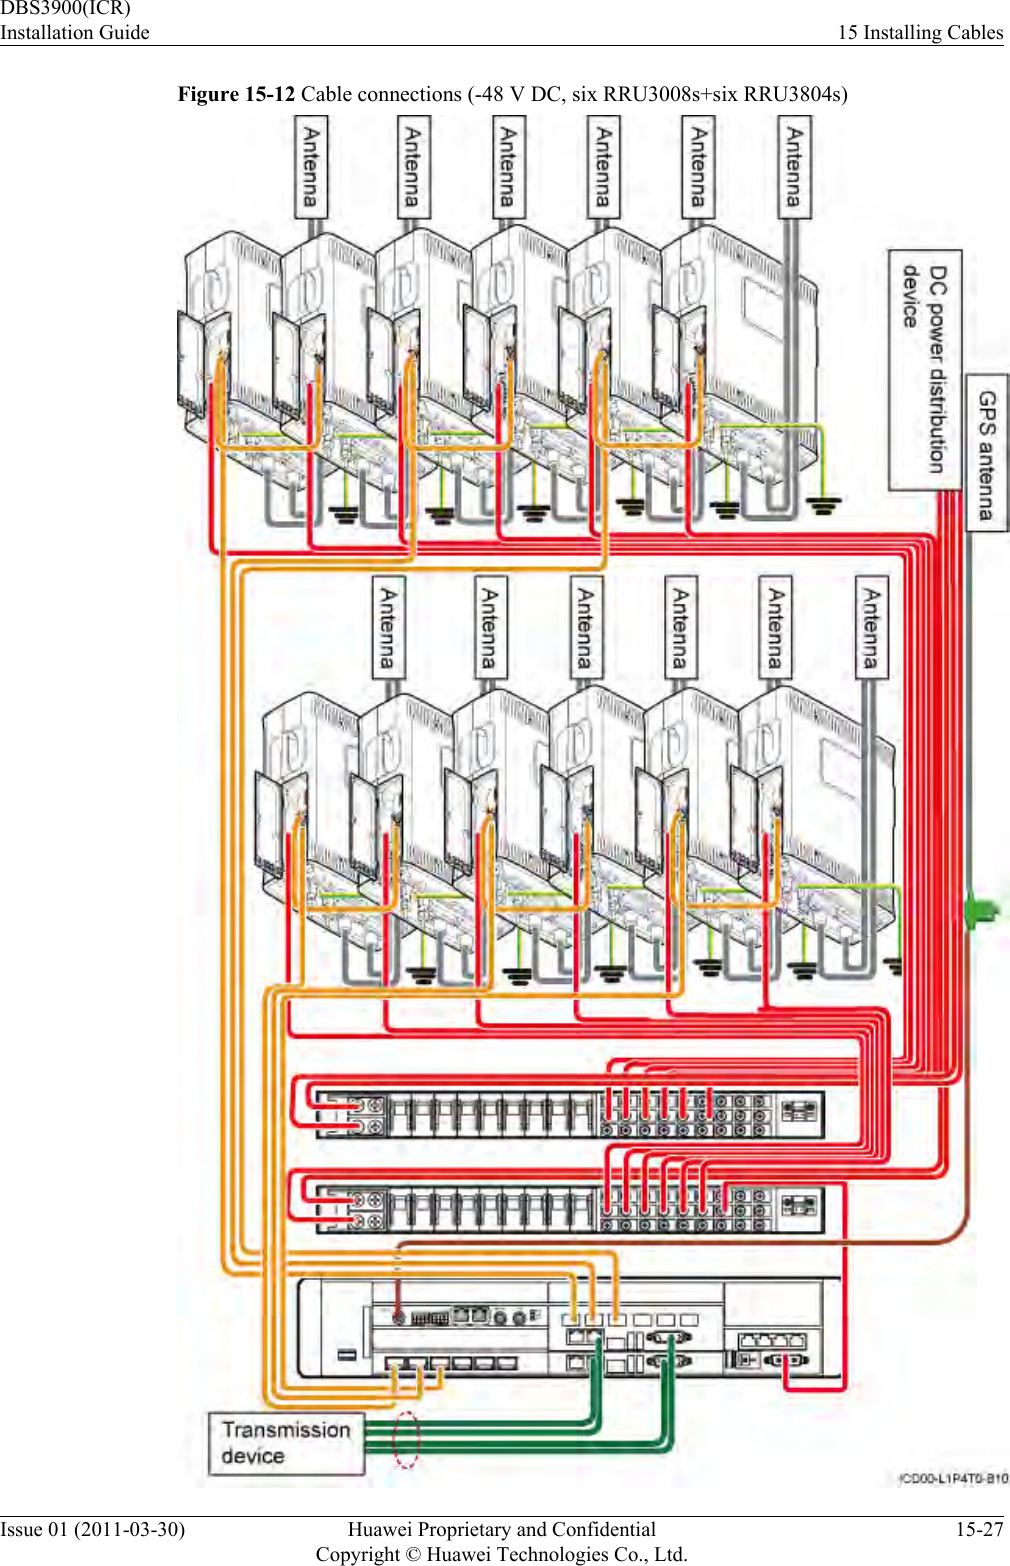 Figure 15-12 Cable connections (-48 V DC, six RRU3008s+six RRU3804s)DBS3900(ICR)Installation Guide 15 Installing CablesIssue 01 (2011-03-30) Huawei Proprietary and ConfidentialCopyright © Huawei Technologies Co., Ltd.15-27